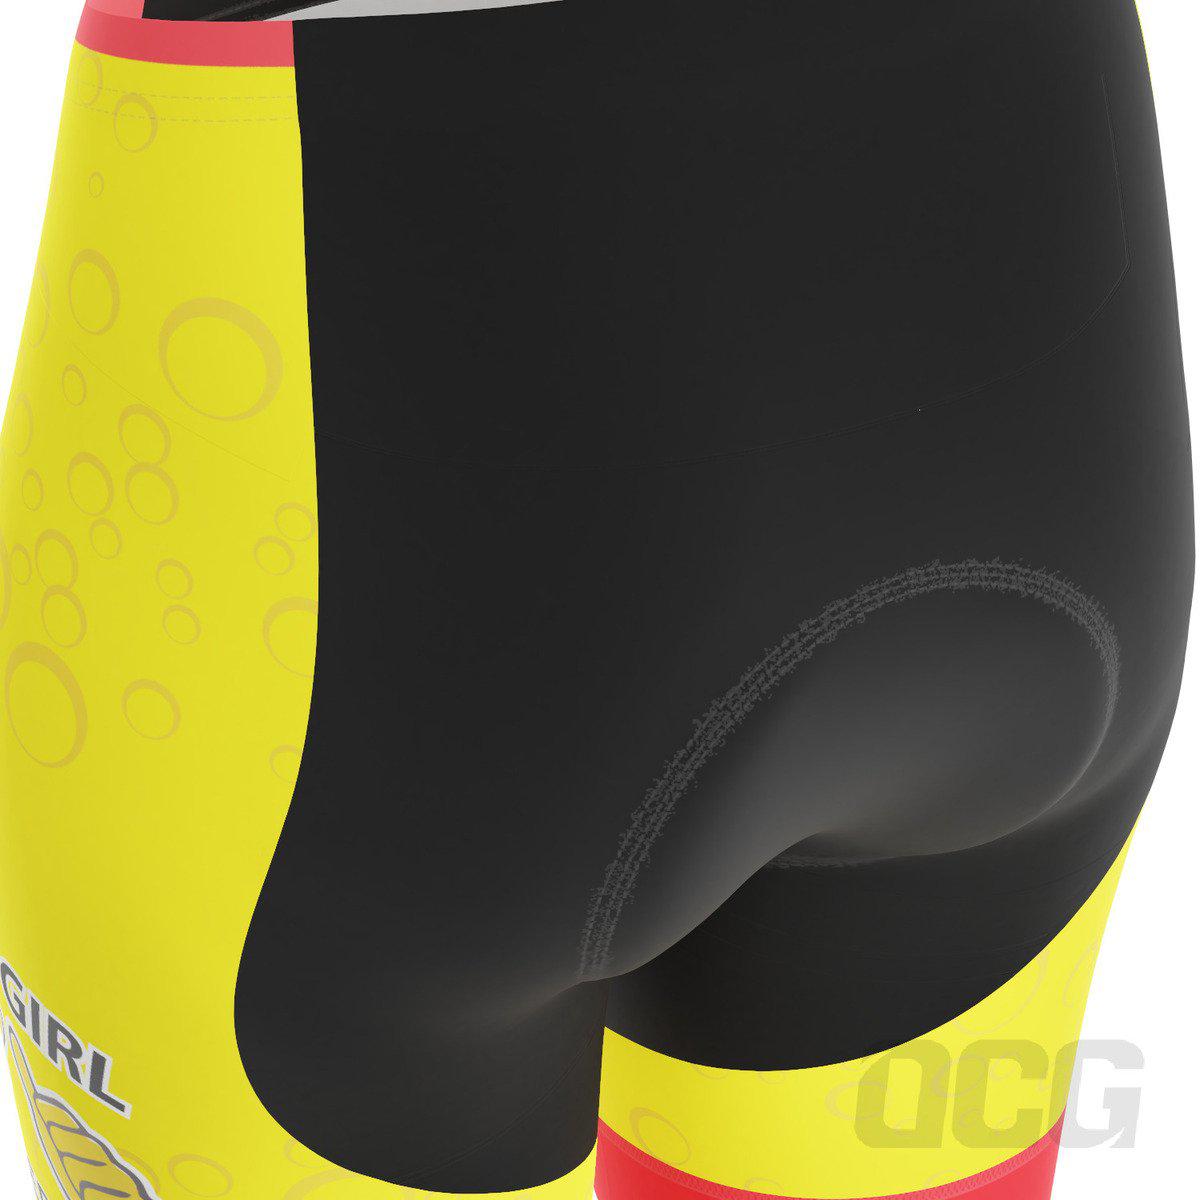 Women's This Girl Needs a Beer Gel Padded Cycling Shorts